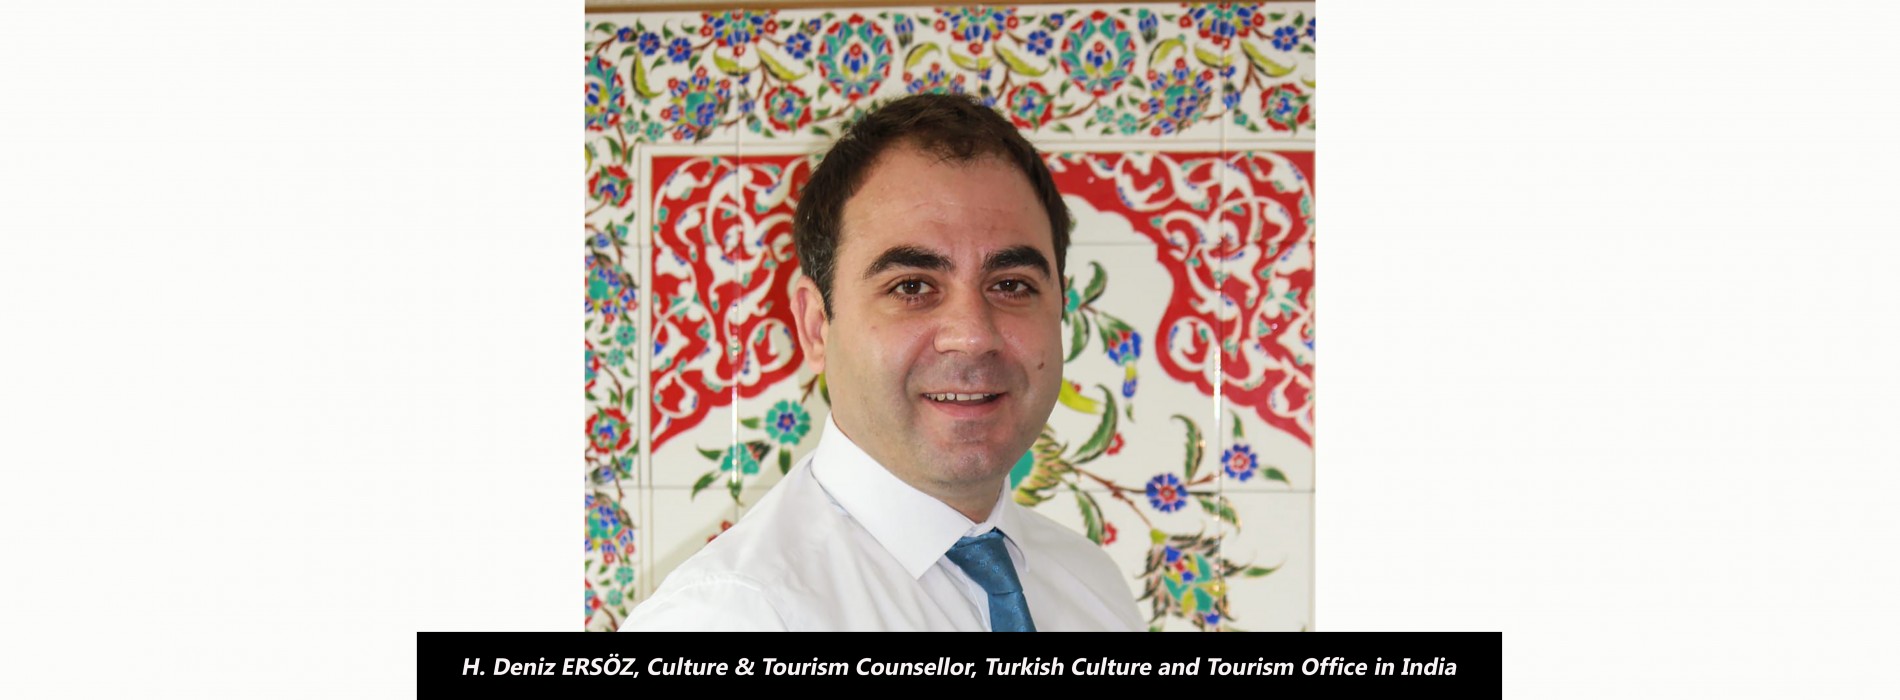 Linkin Reps appointed as PR & Media representative for Turkish Culture and Tourism Office in India